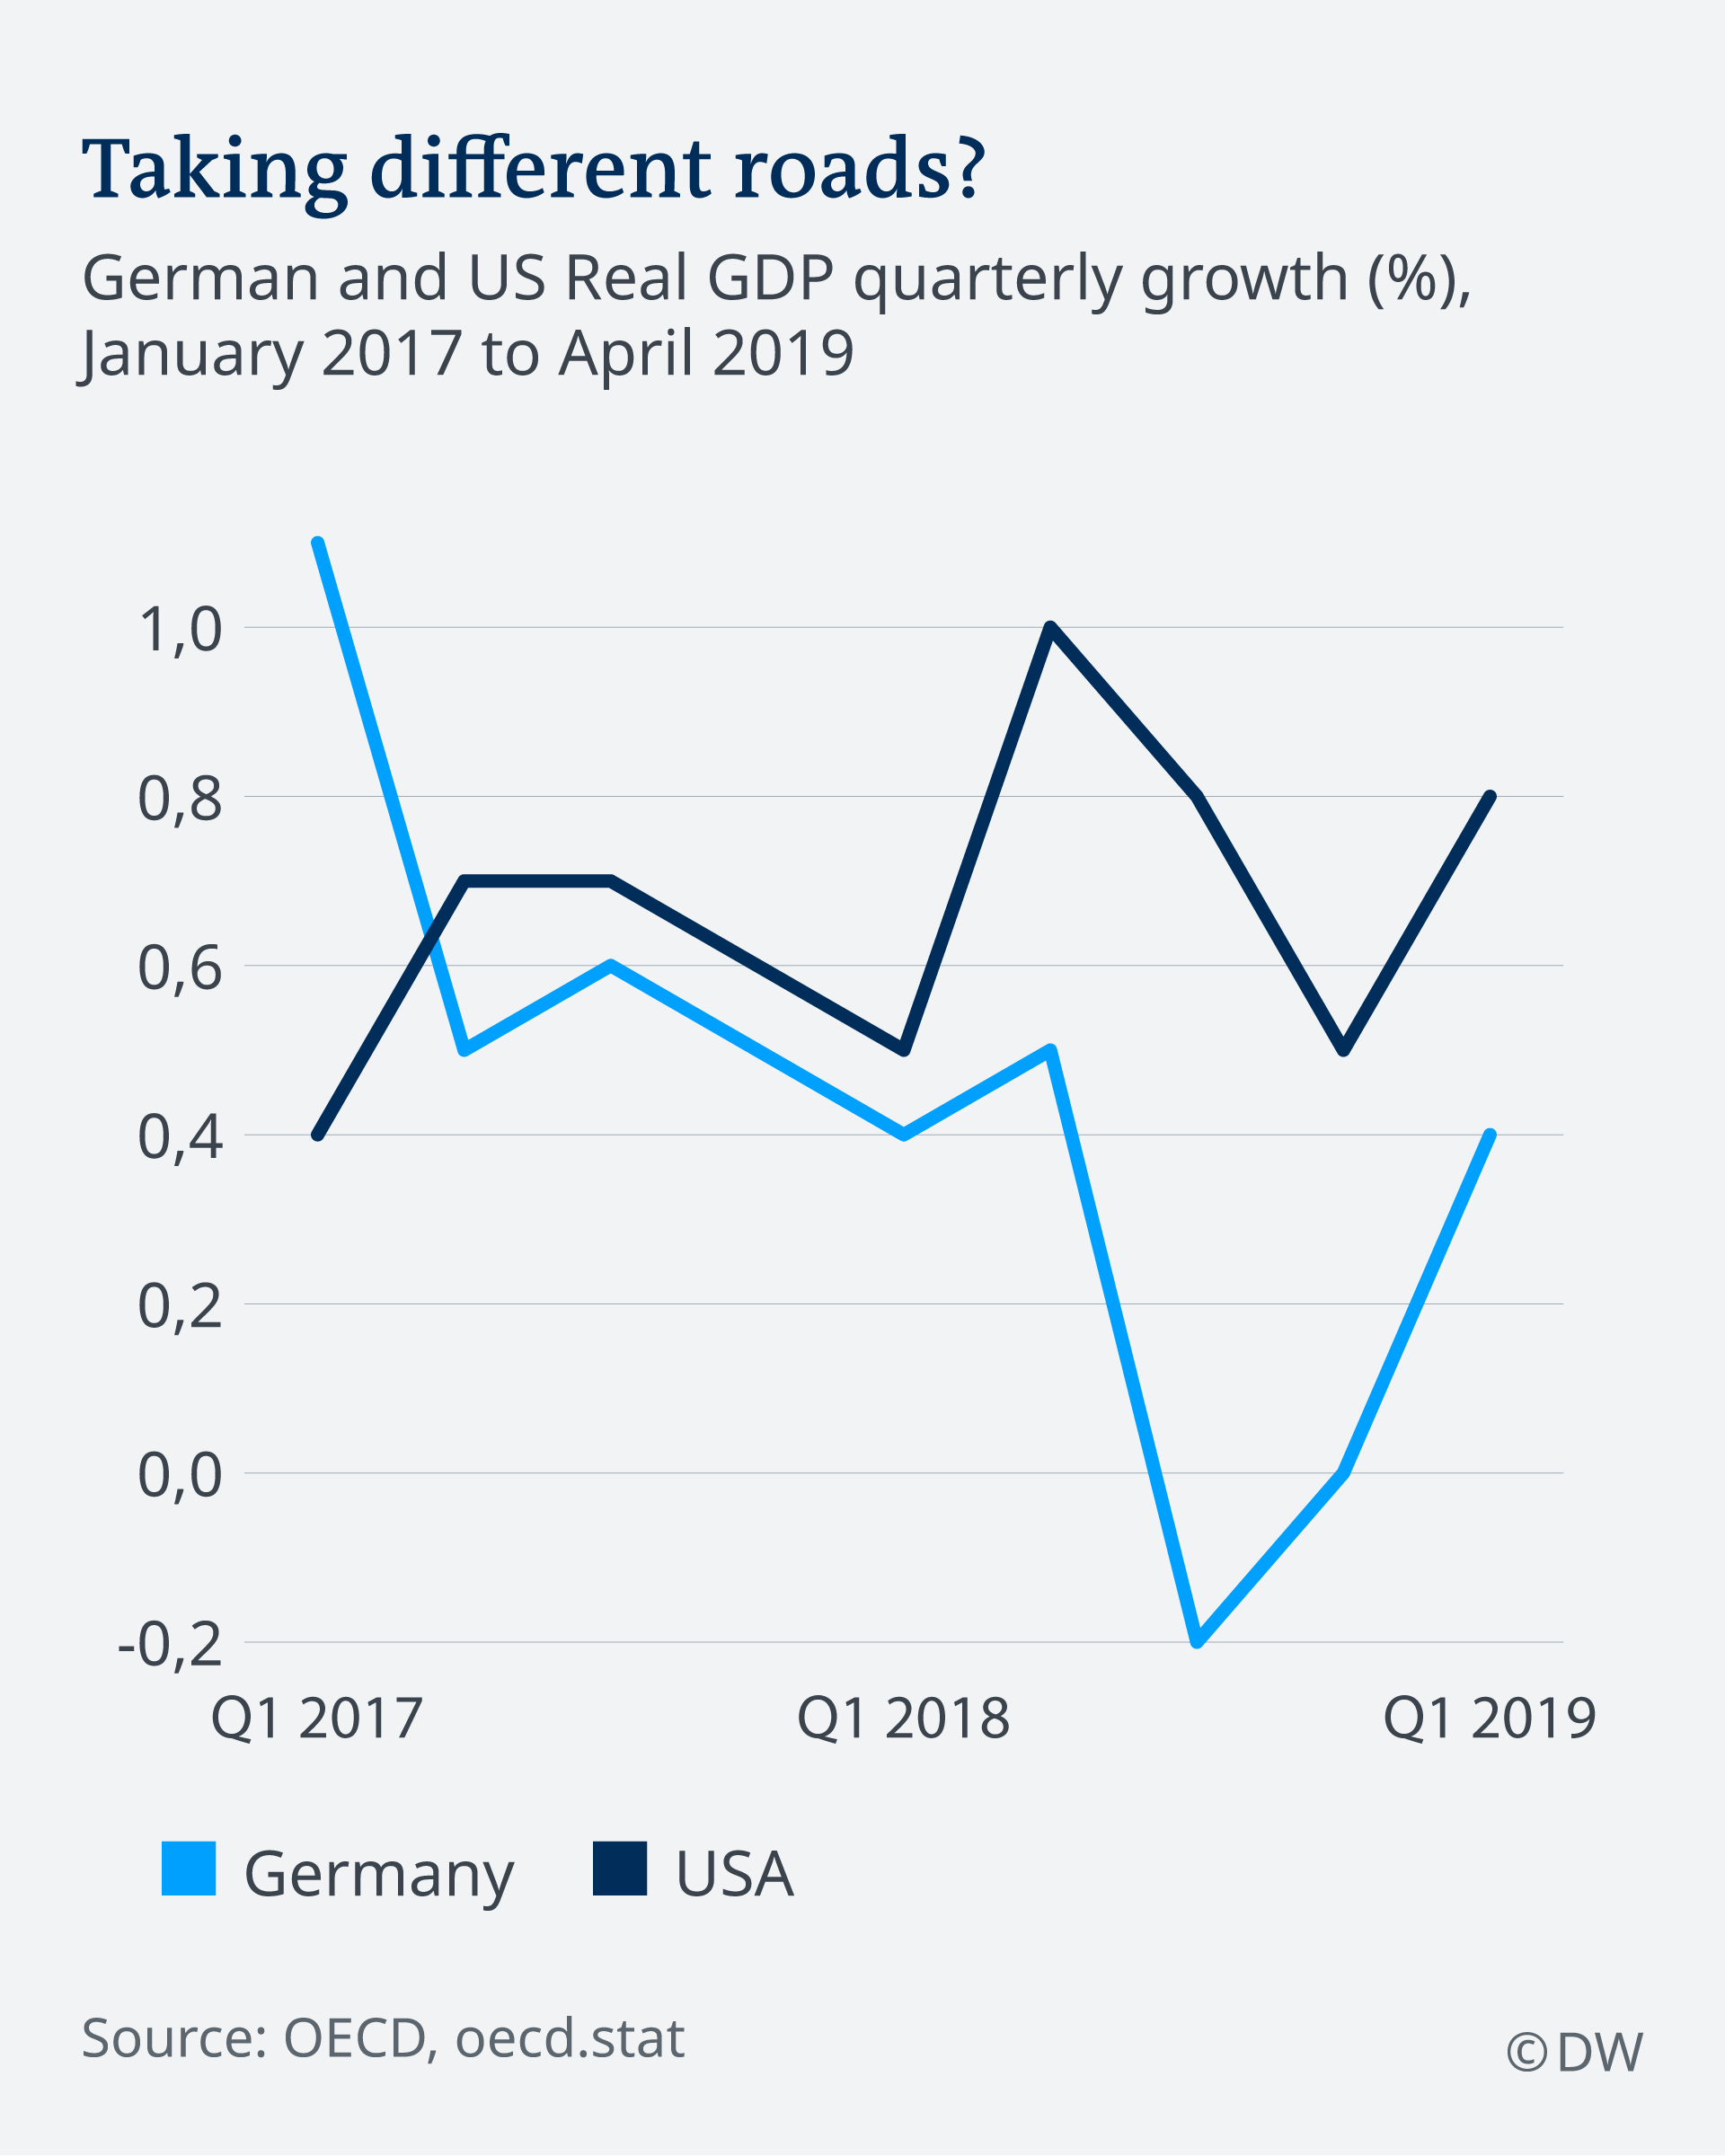 German and US real GDP quarterly growth 2017-2019